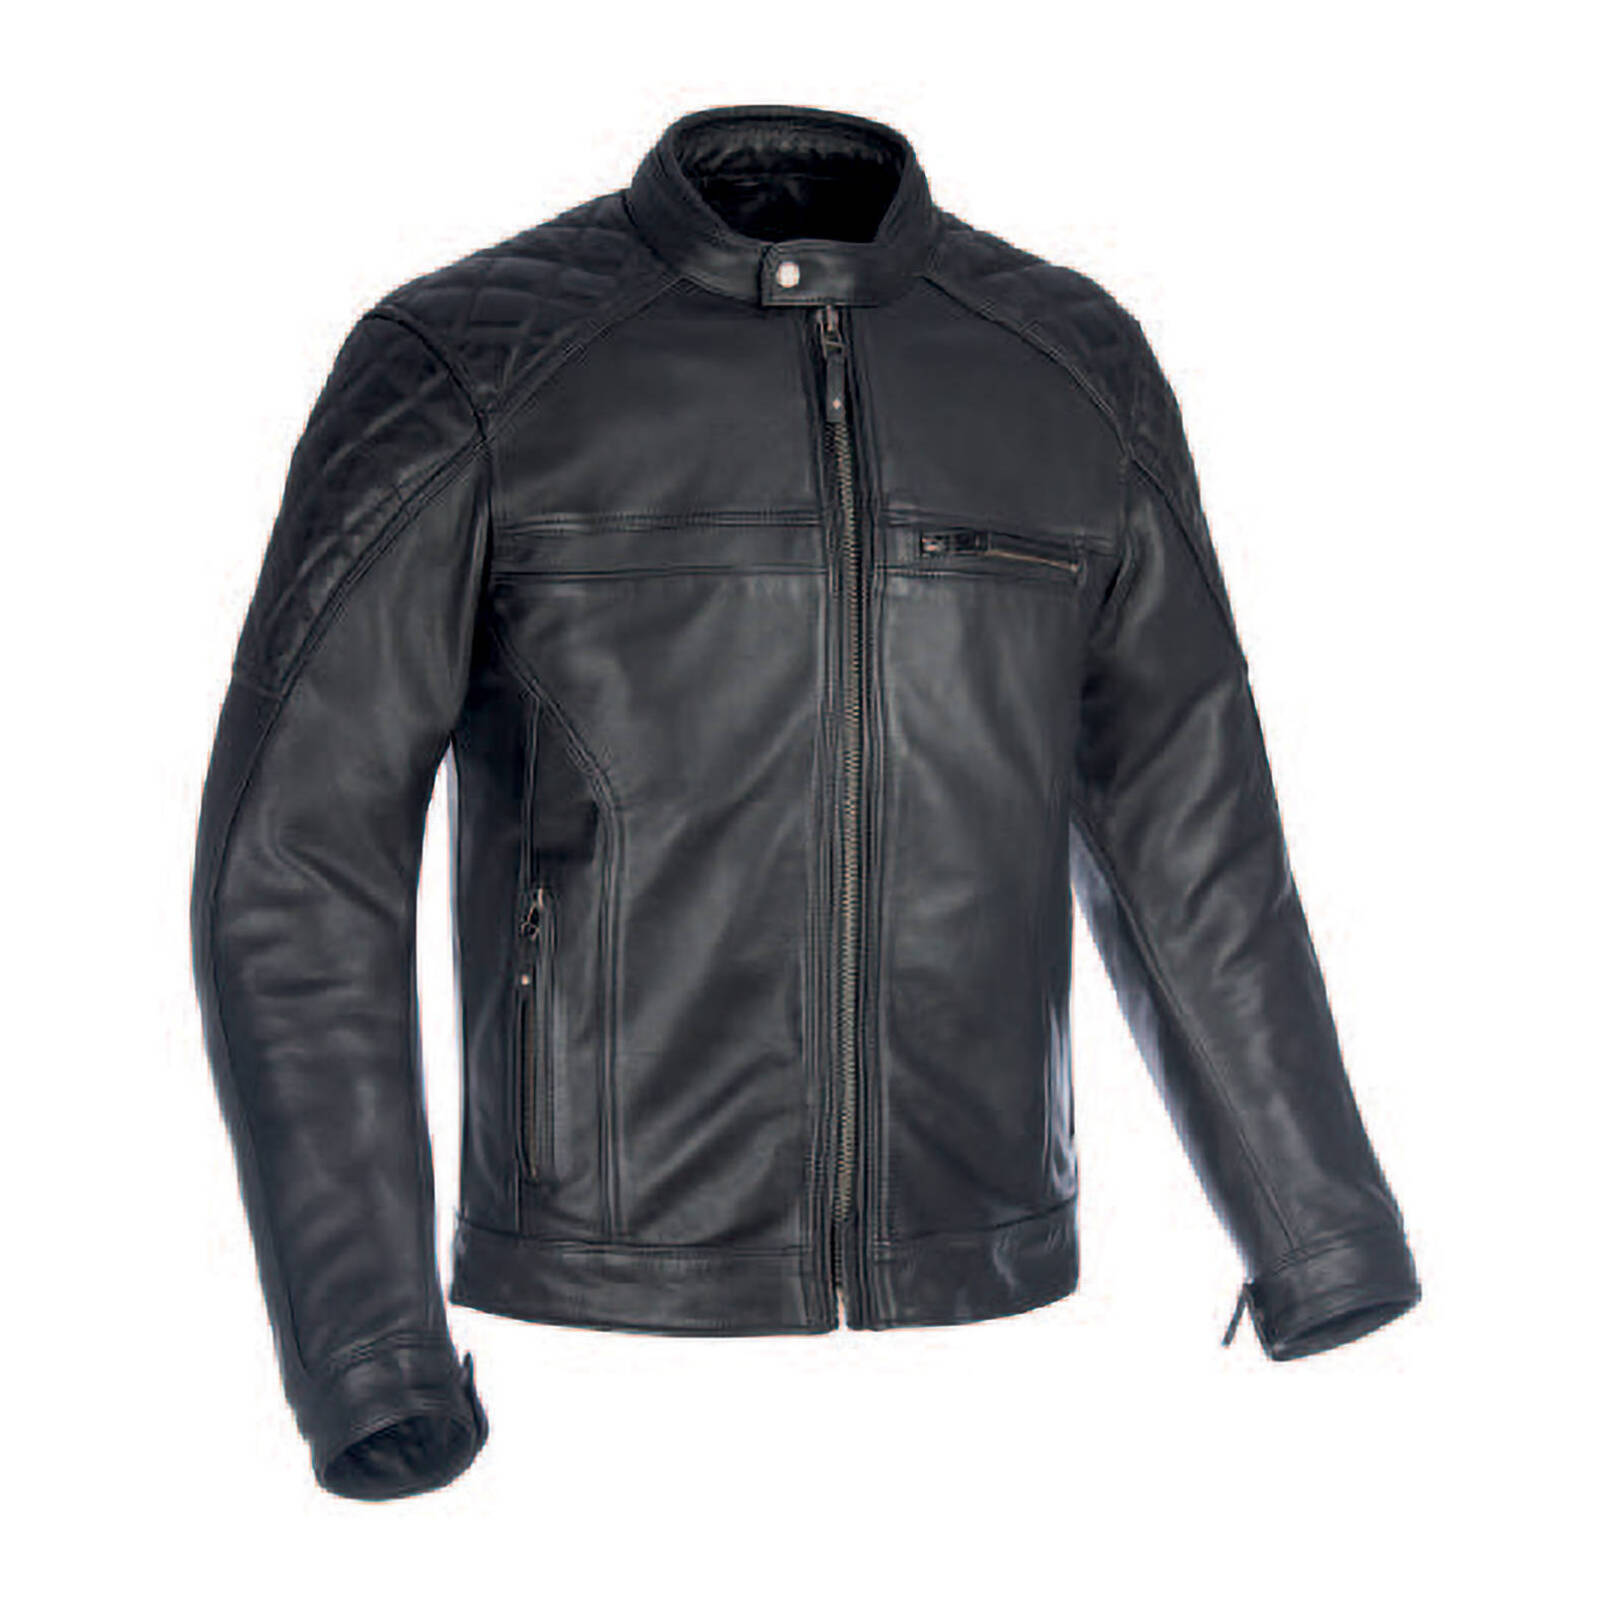 Oxford Route 73 2.0 Leather Jacket - Black (L)